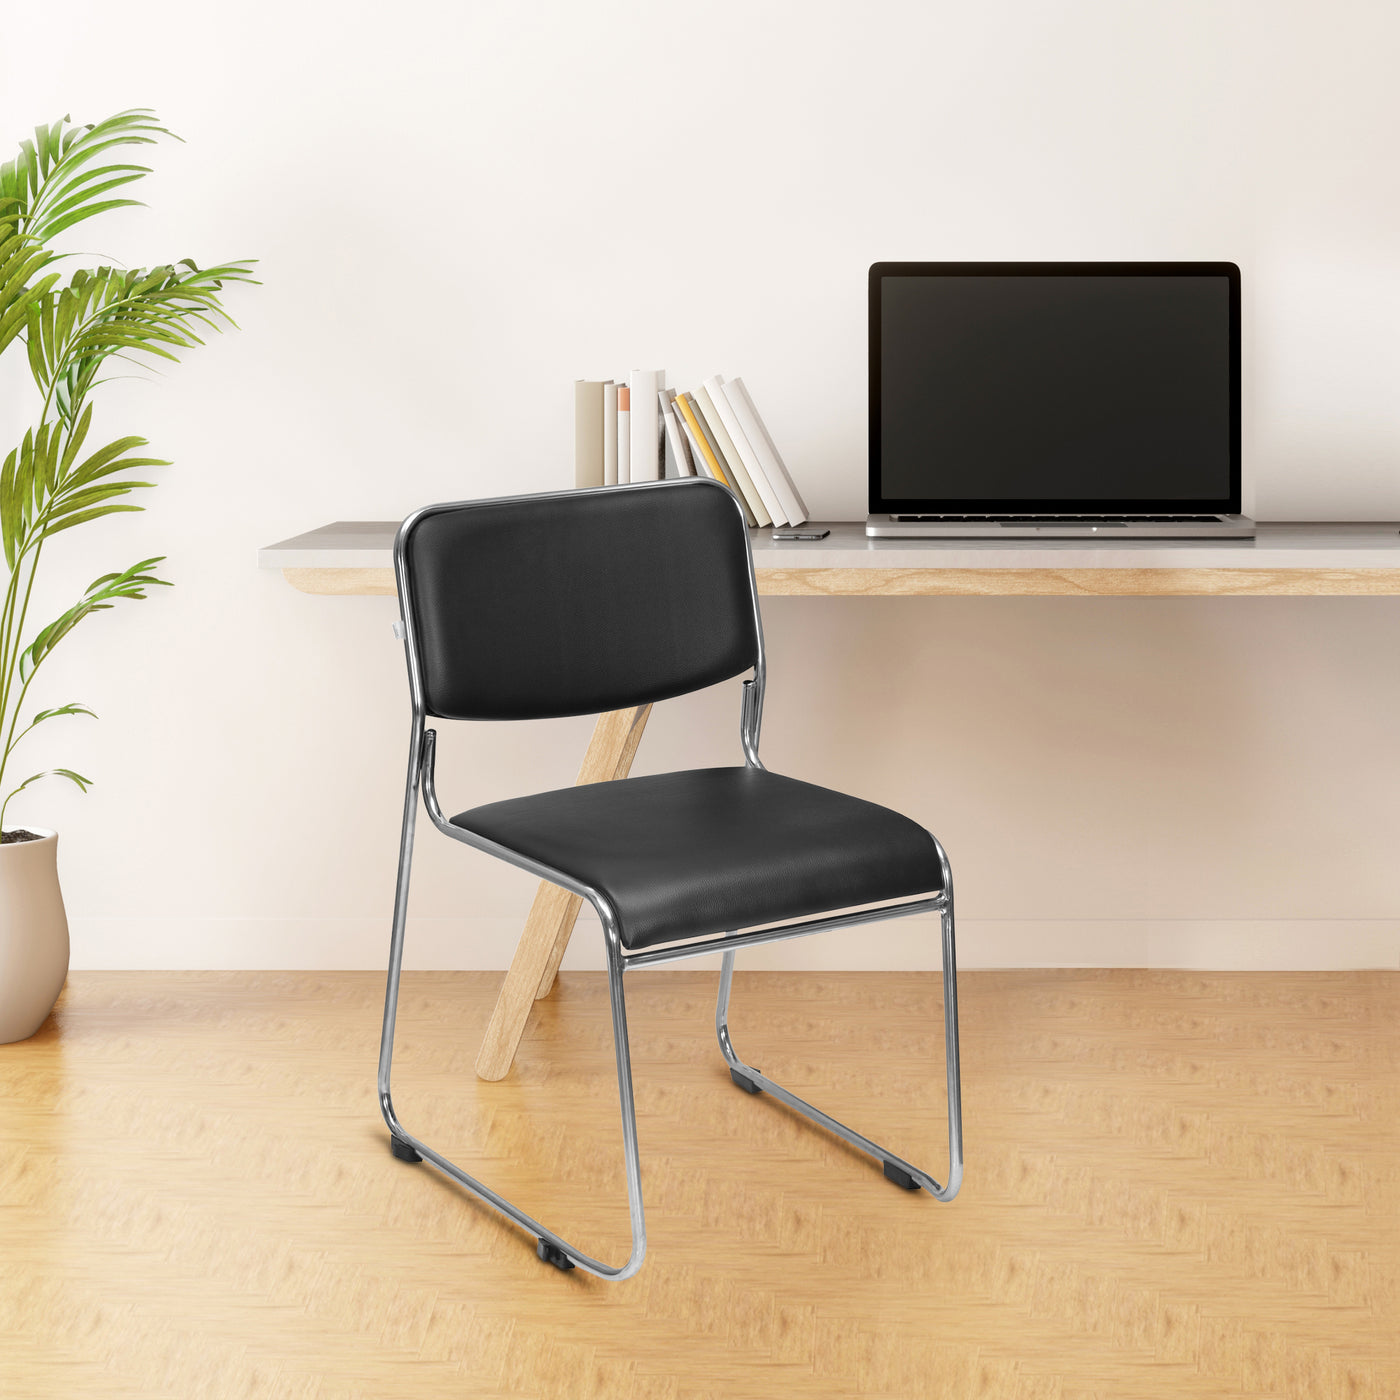 Nilkamal Contract 01 without Arm Visitor Chair (Black)